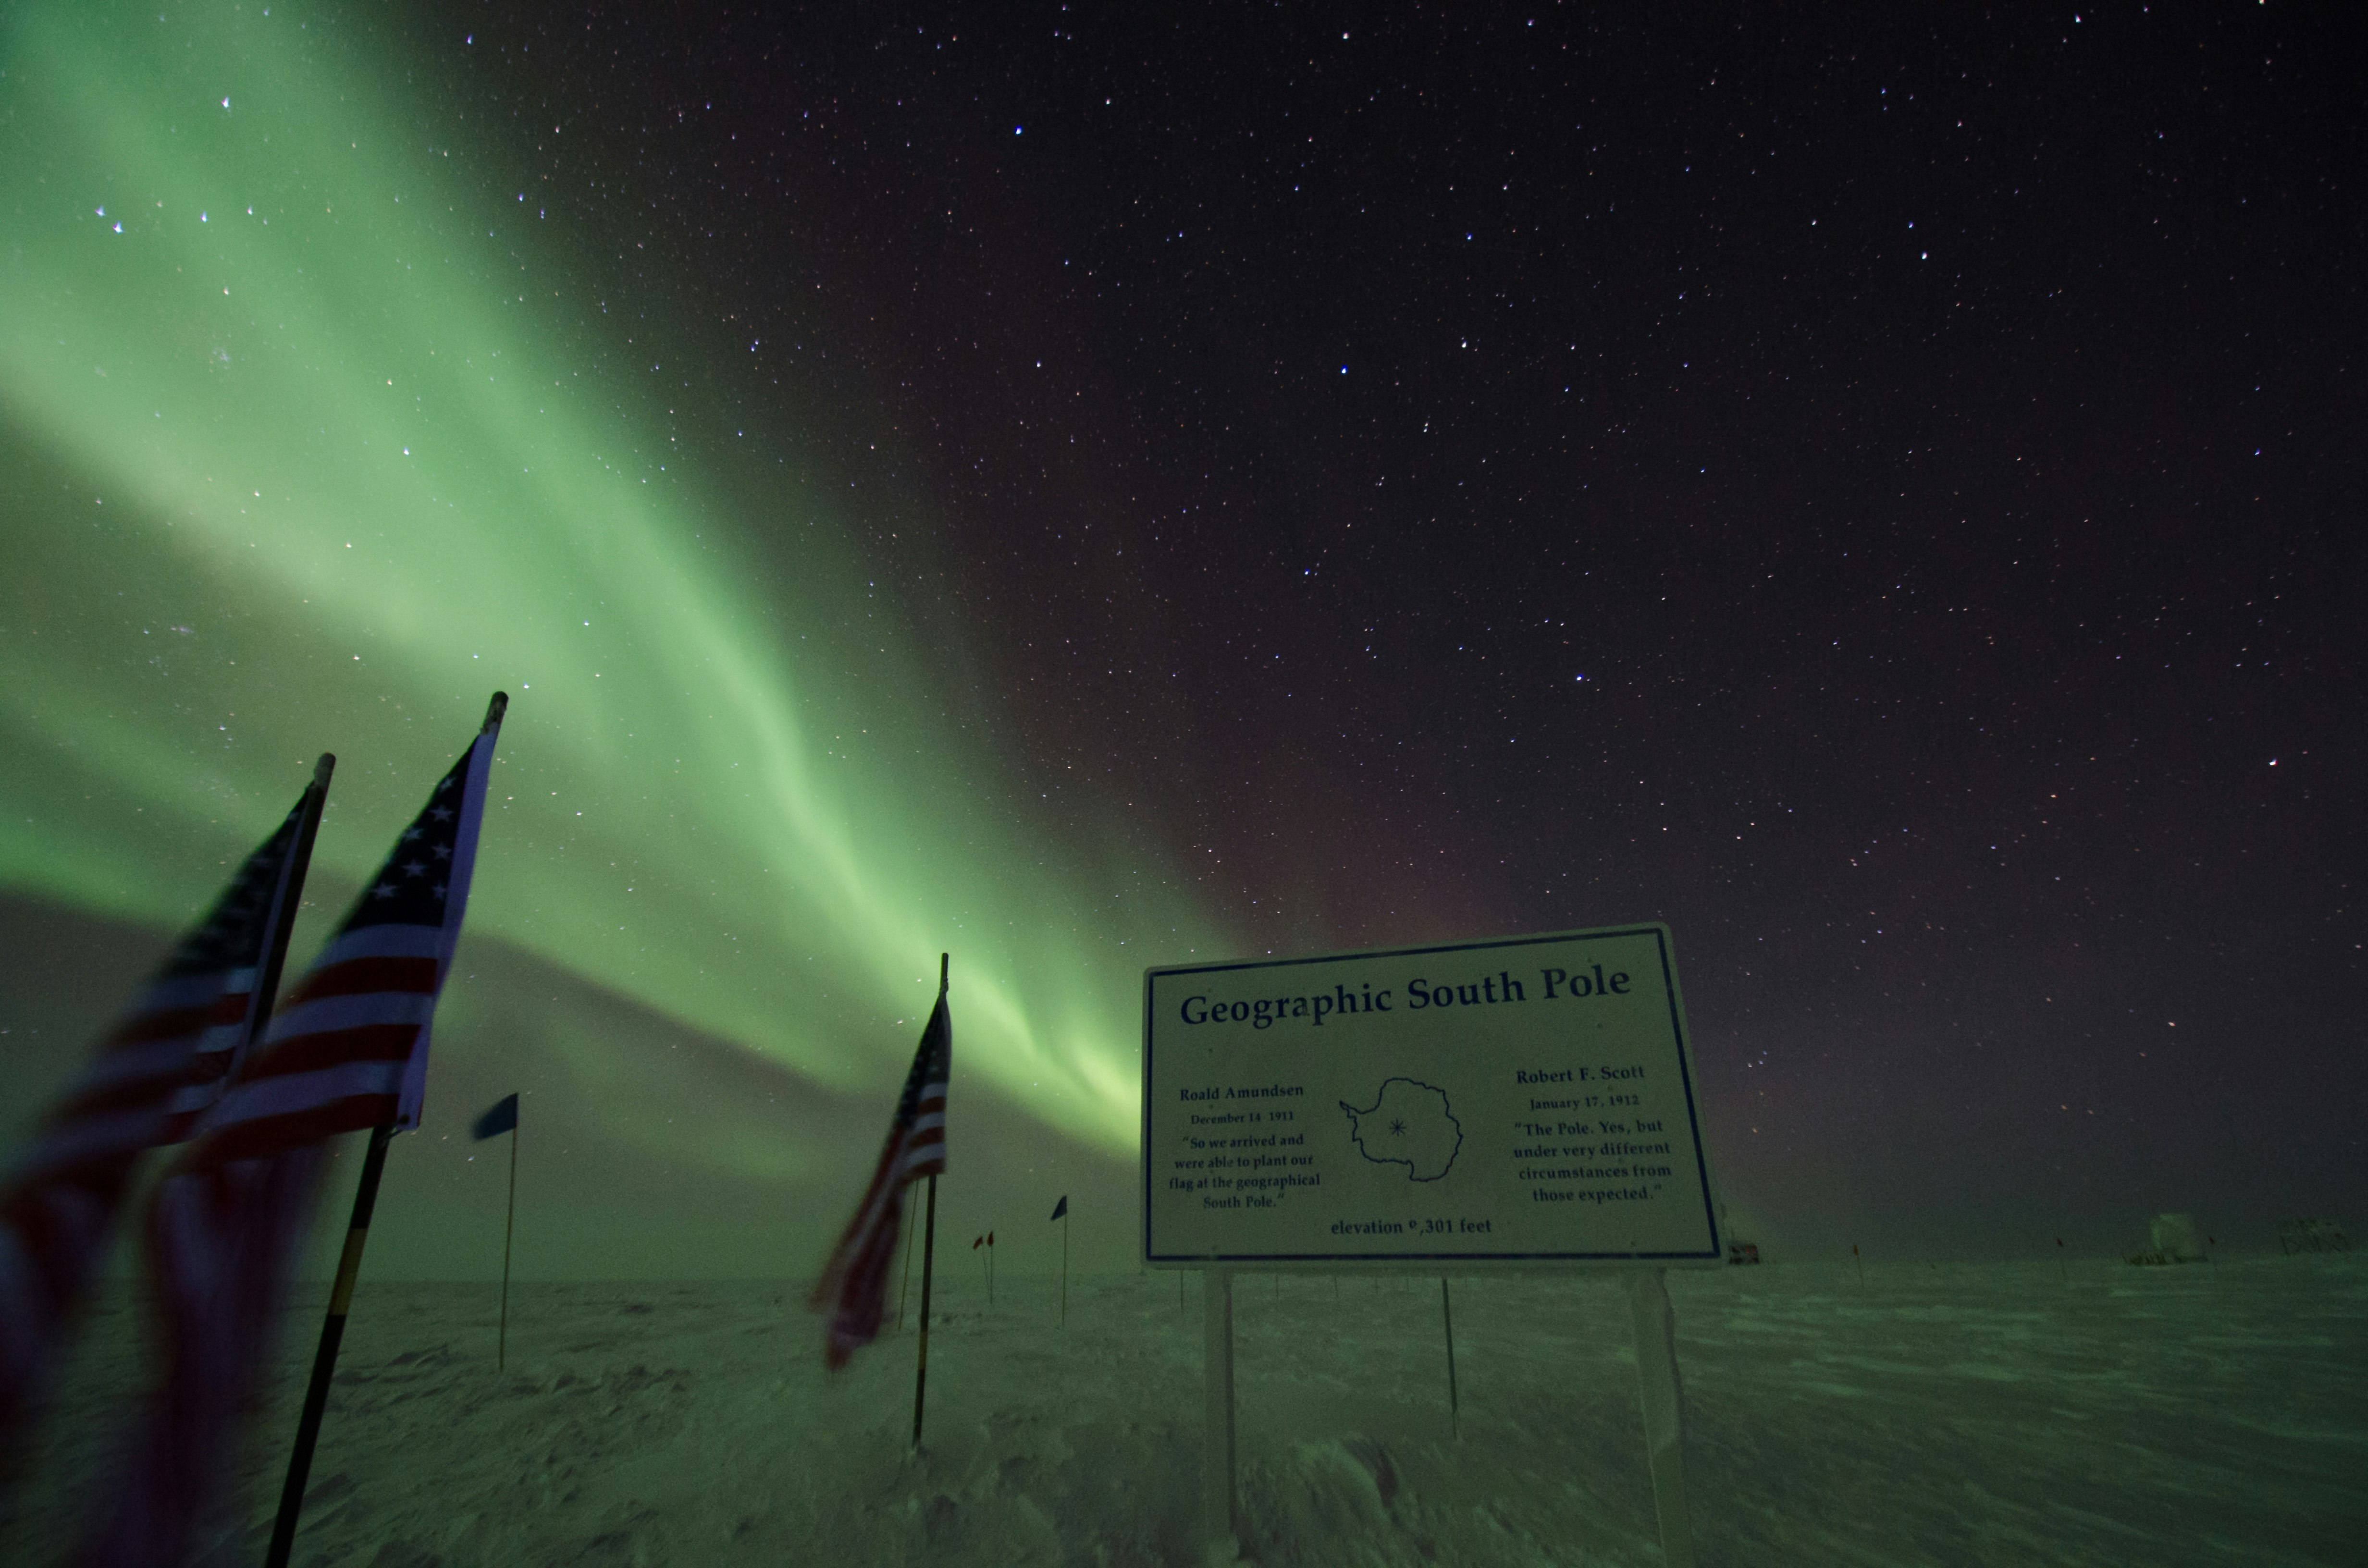 Starry night with aurora australis over the geographic South Pole. 